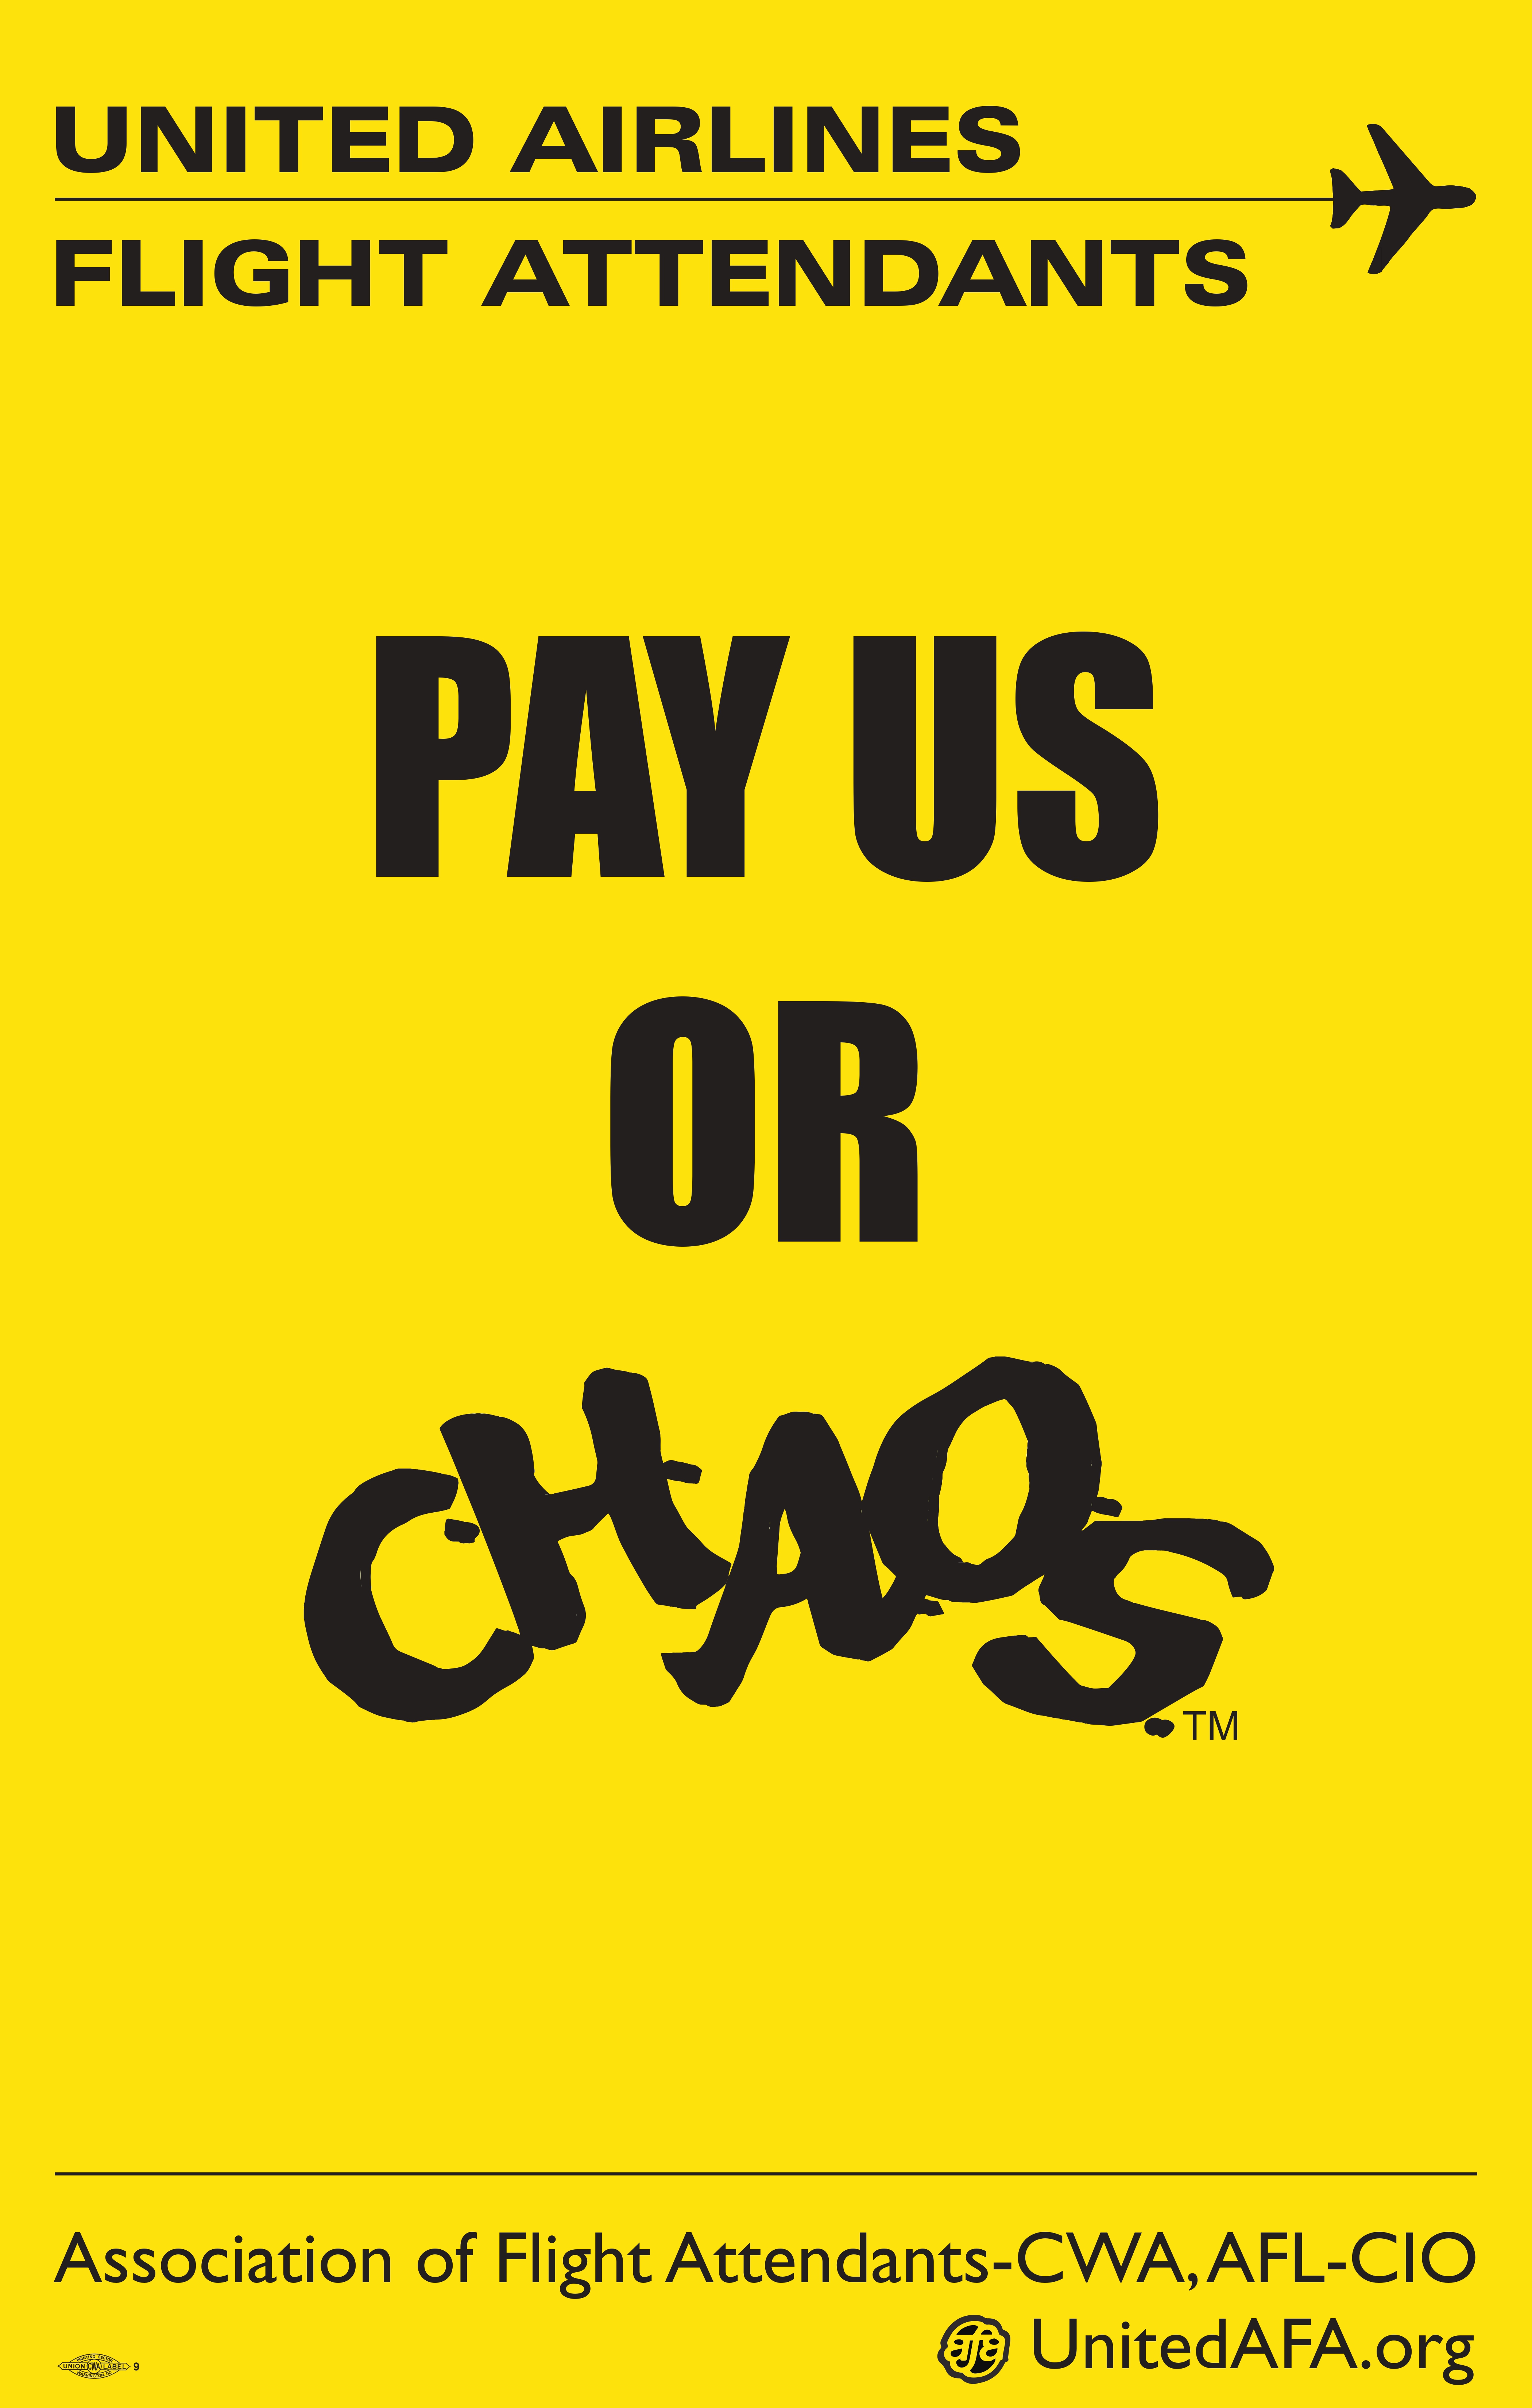 Pay us or chaos Picket Sign (1)